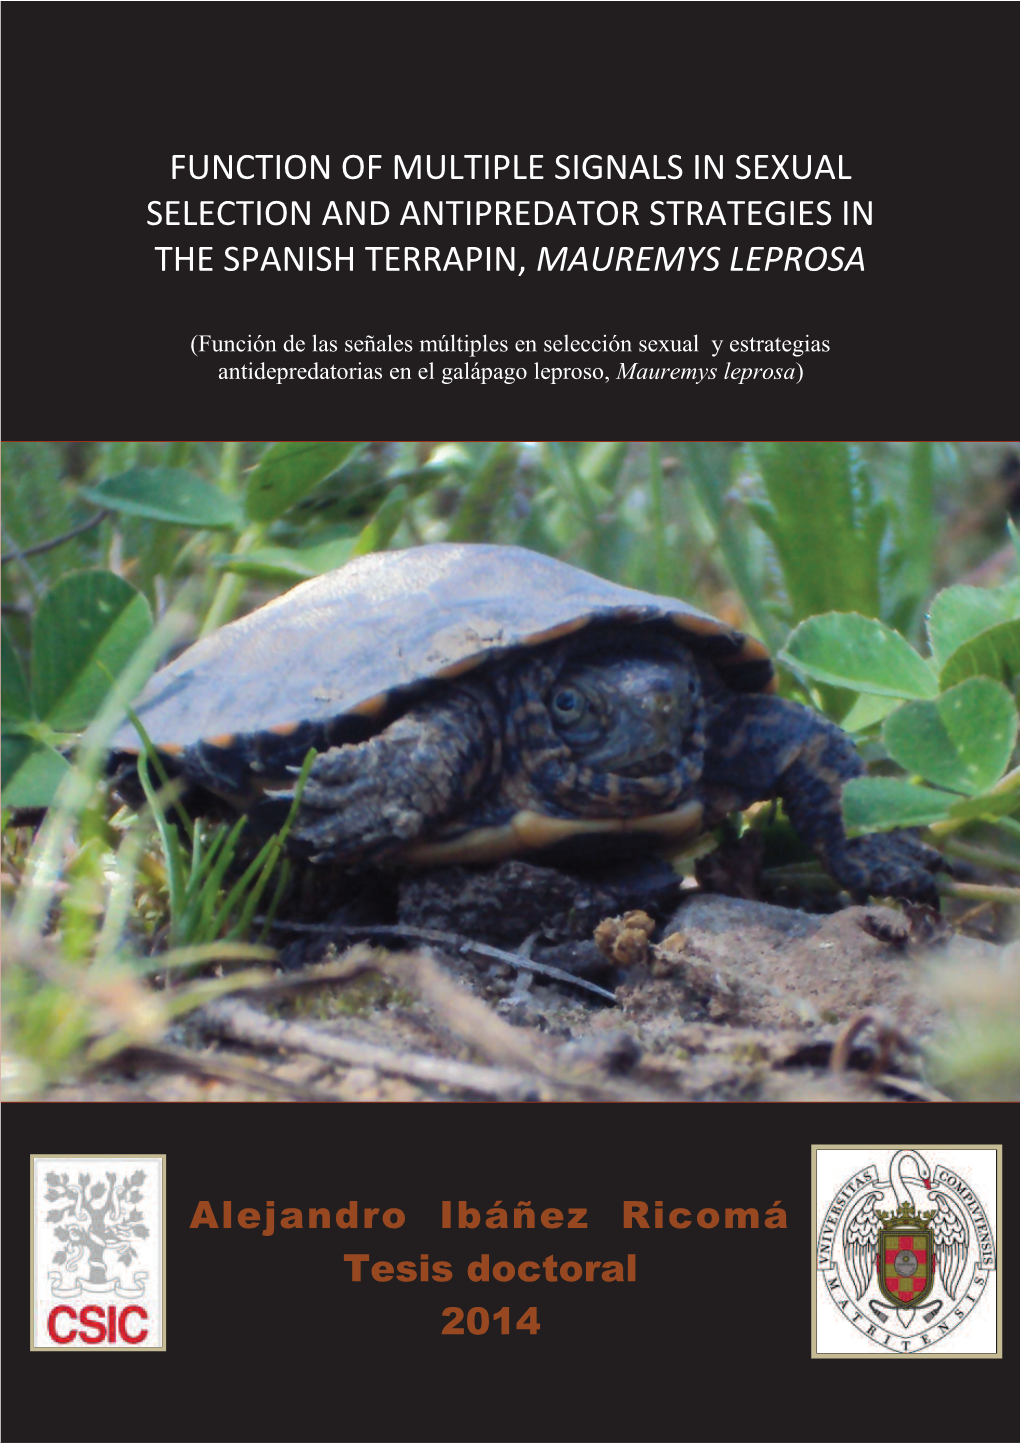 Function of Multiple Signals in Sexual Selection and Antipredator Strategies in the Spanish Terrapin, Mauremys Leprosa